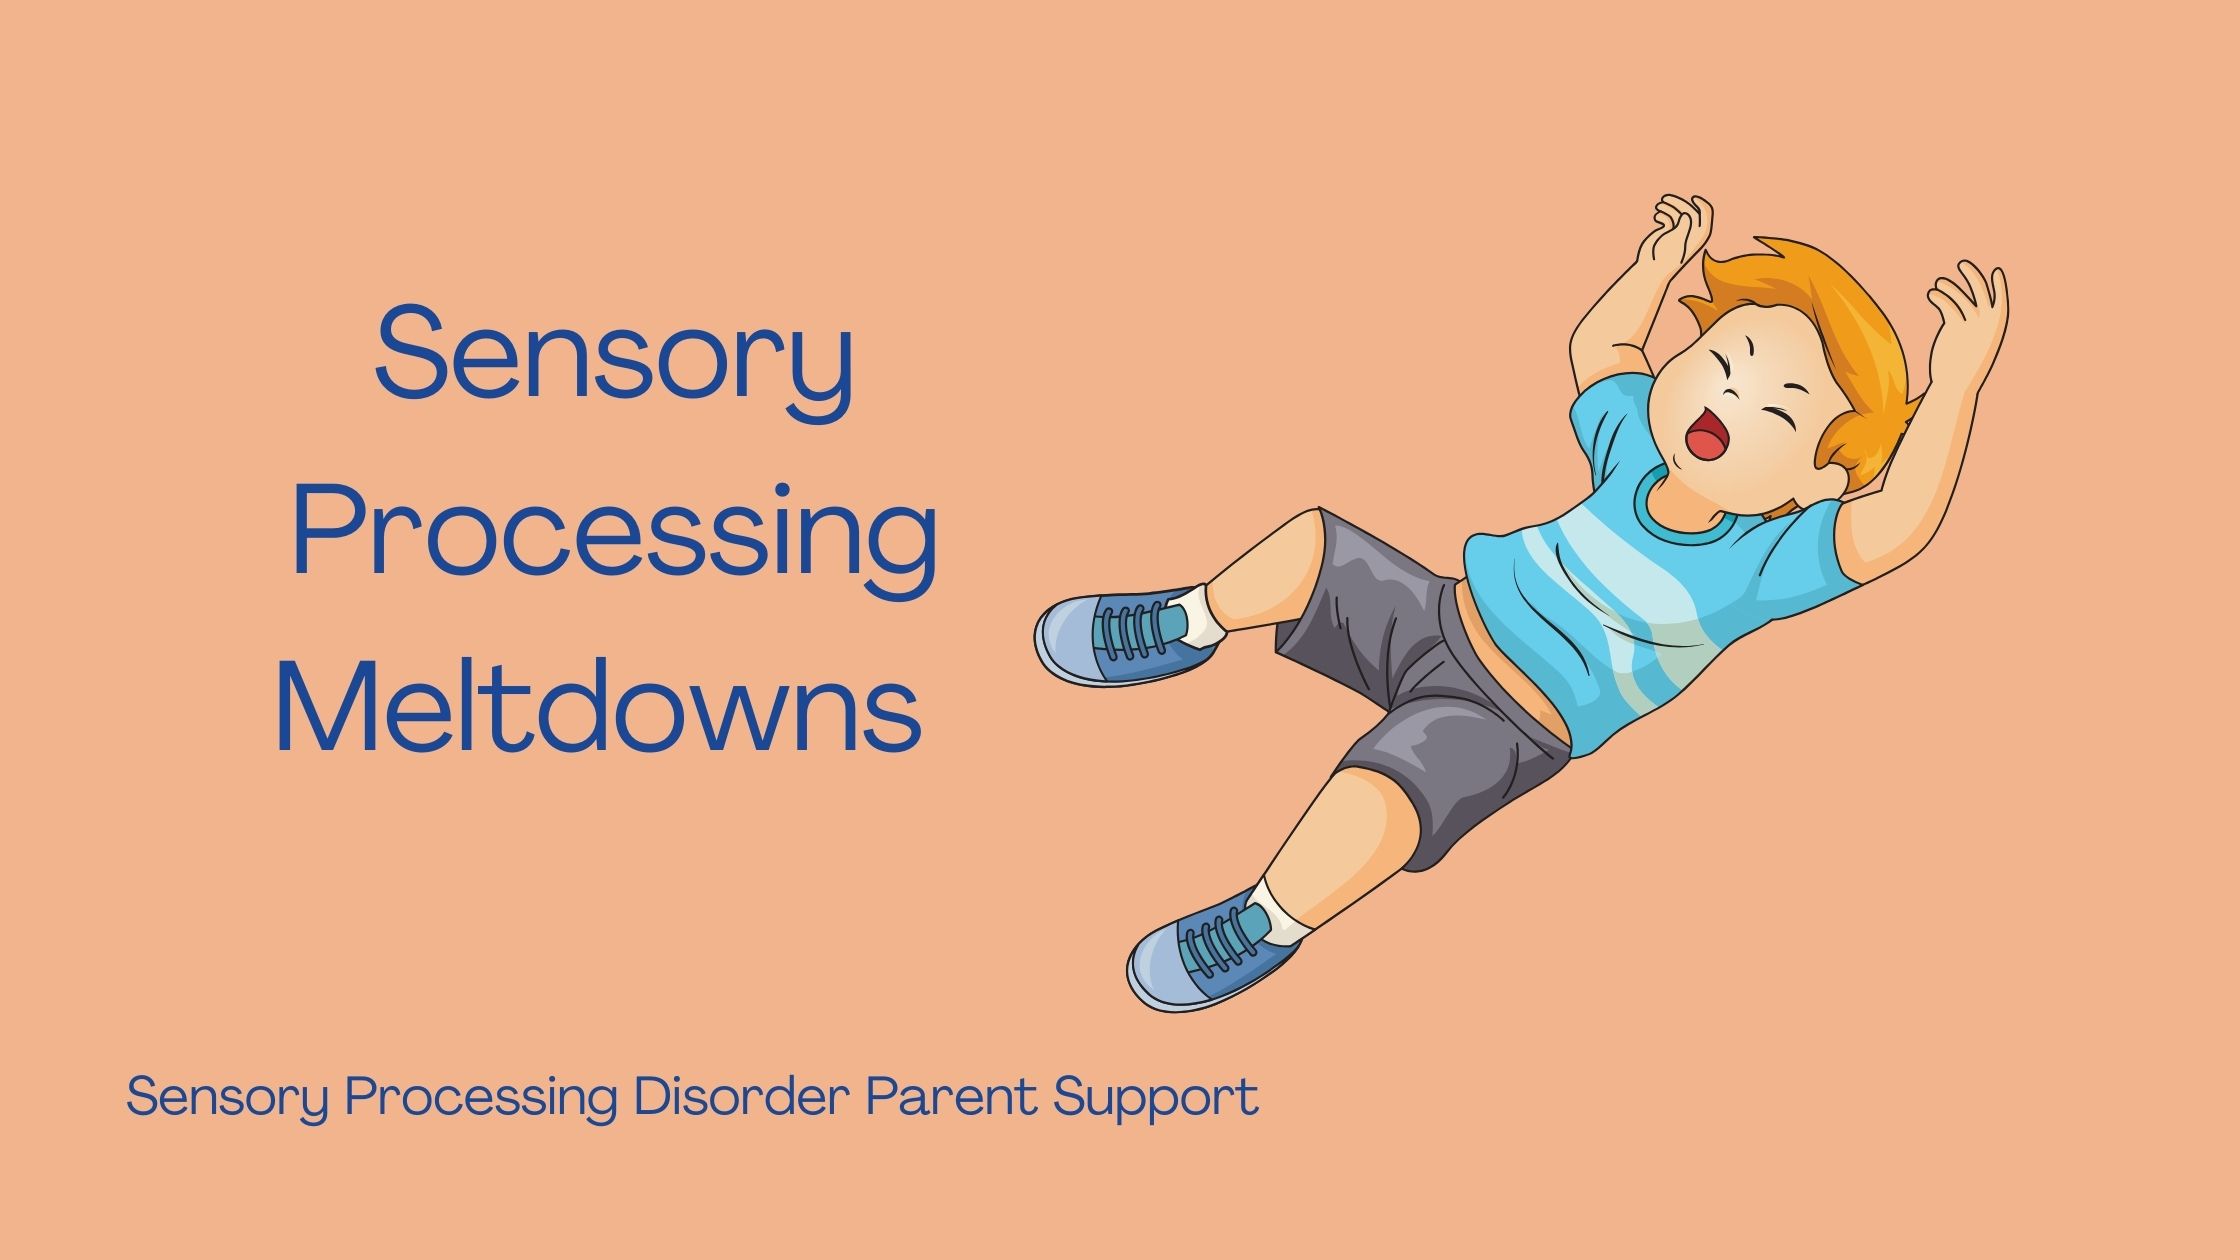 child with sensory differences struggling with sensory processing disorder having a sensory meltdown Sensory Processing Meltdowns